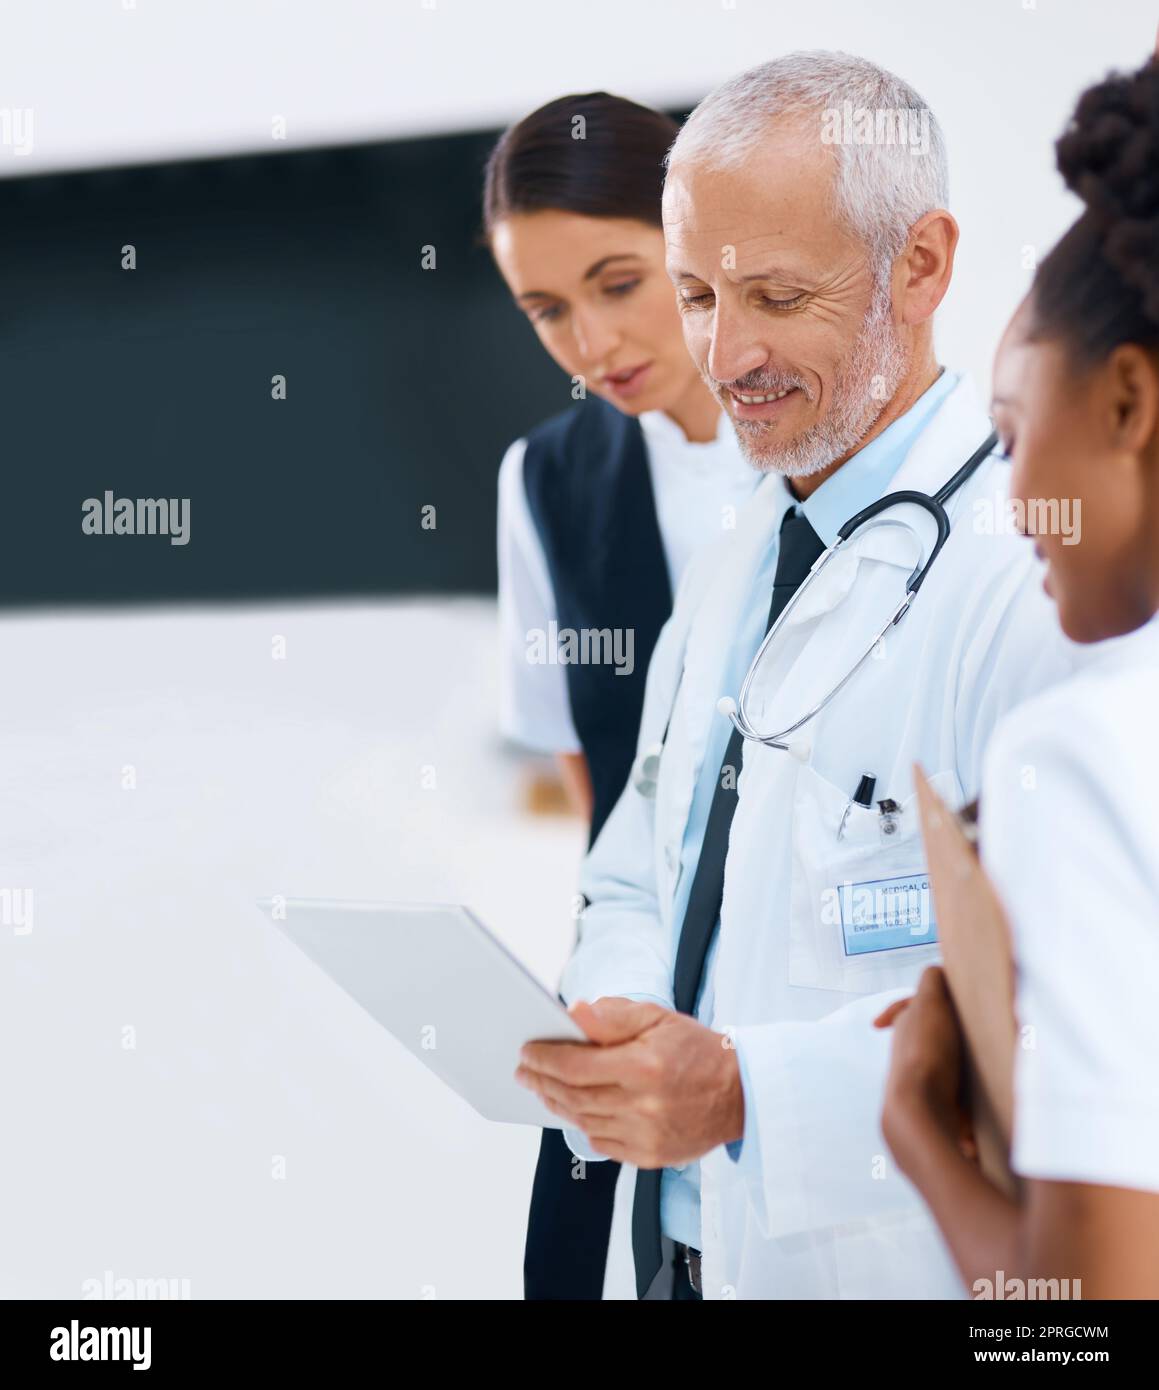 Im impressed with the treatment you chose. a group of medical professionals discussing something on a digital tablet. Stock Photo